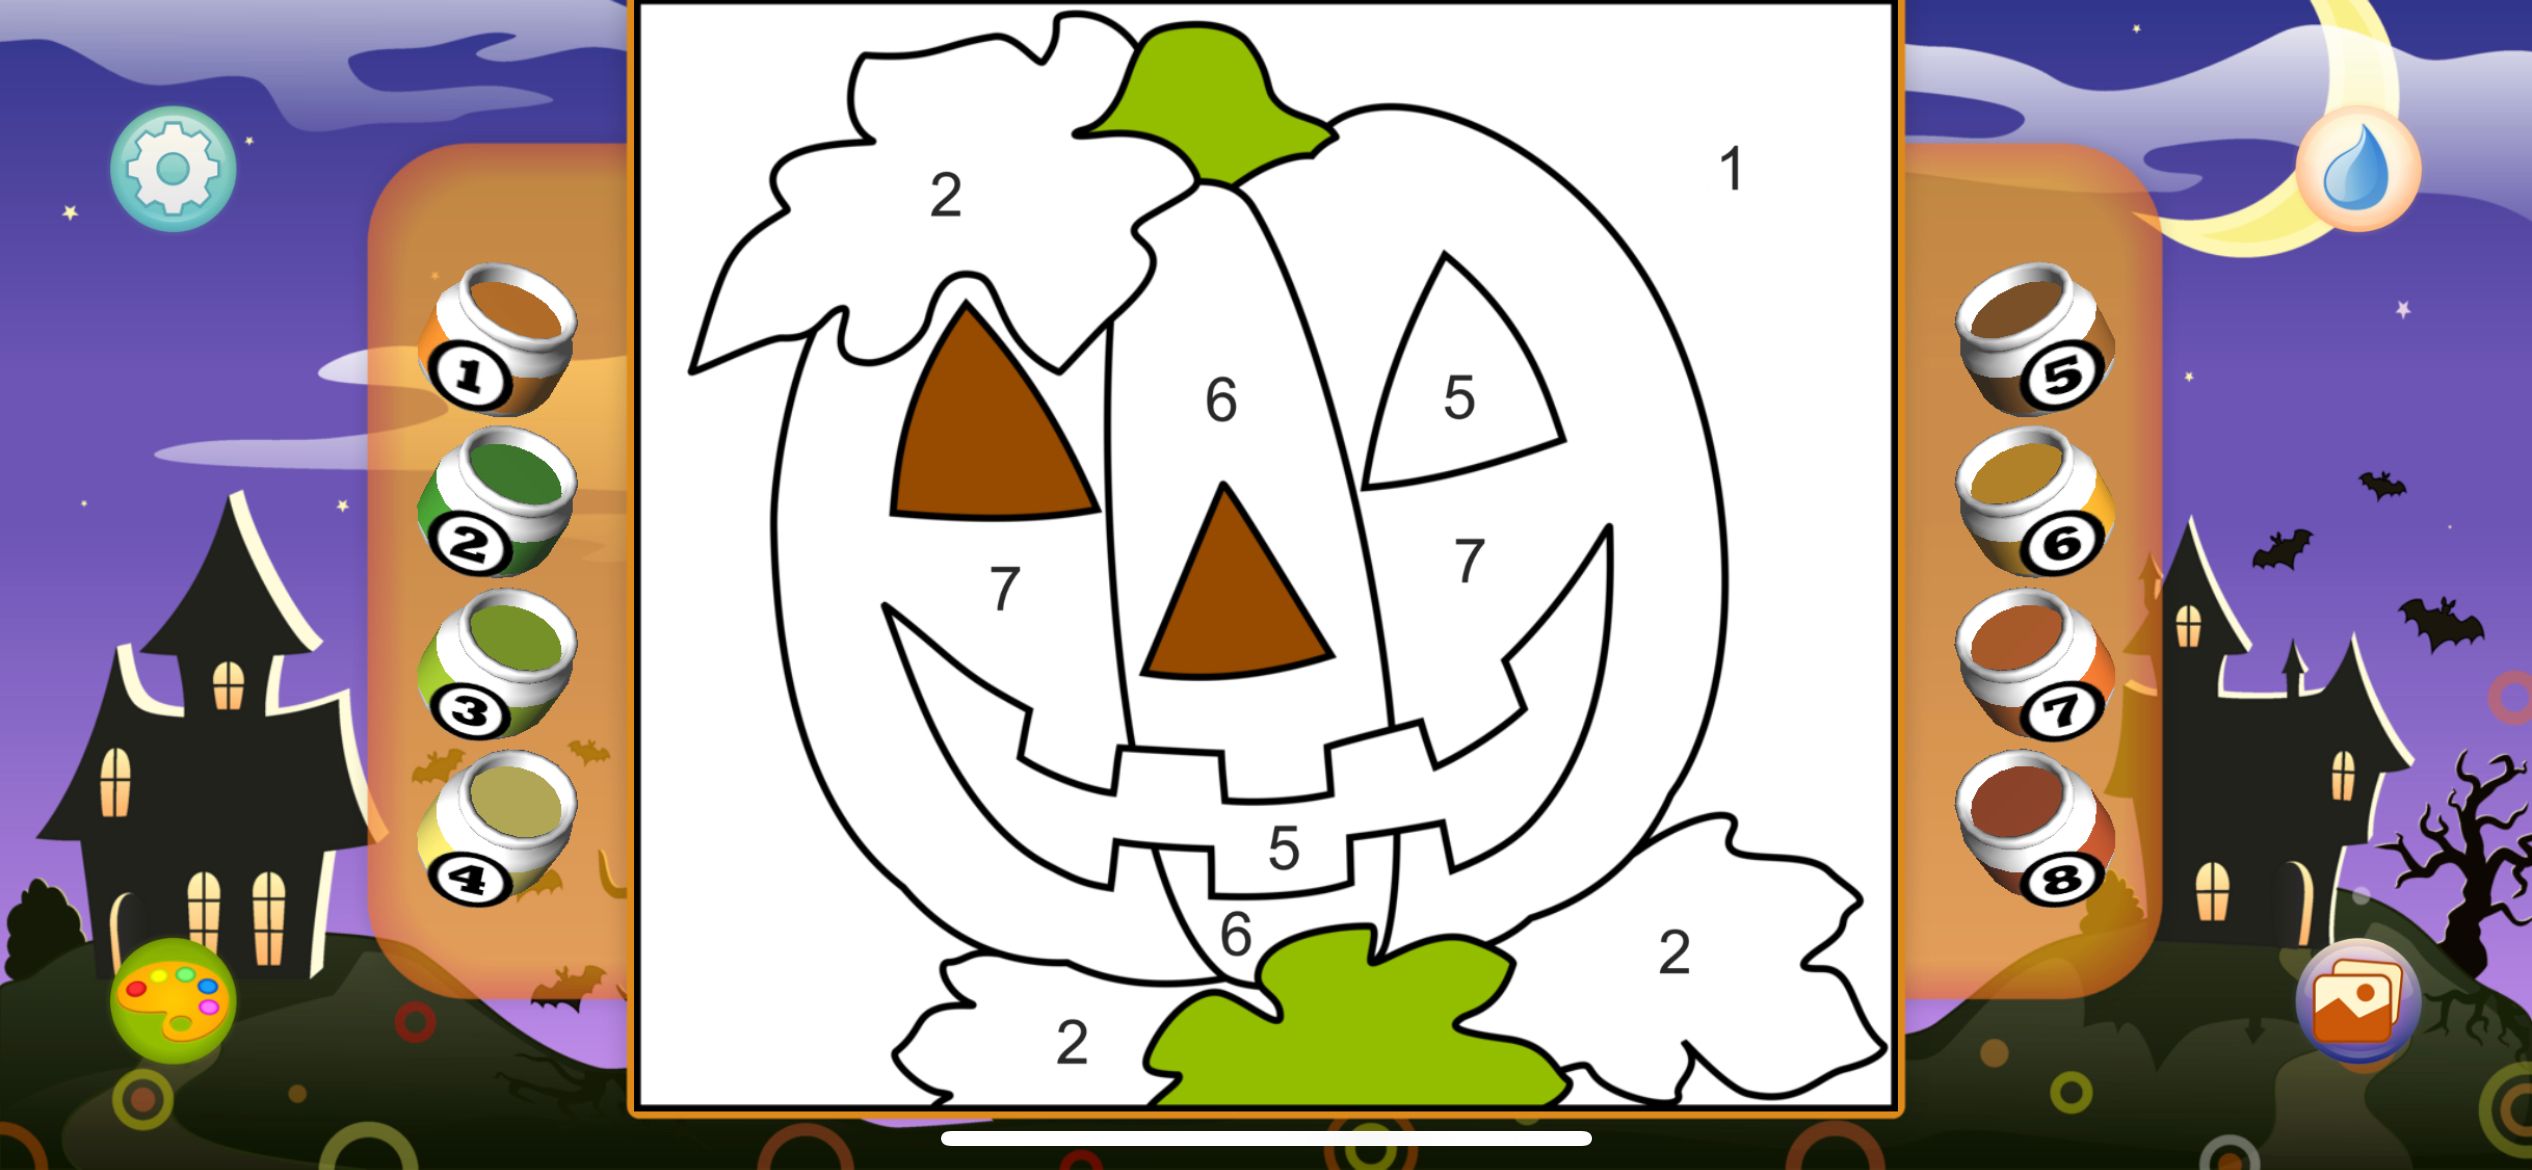 Color By Numbers - Halloween screen shot showing a half completed pumpkin painting